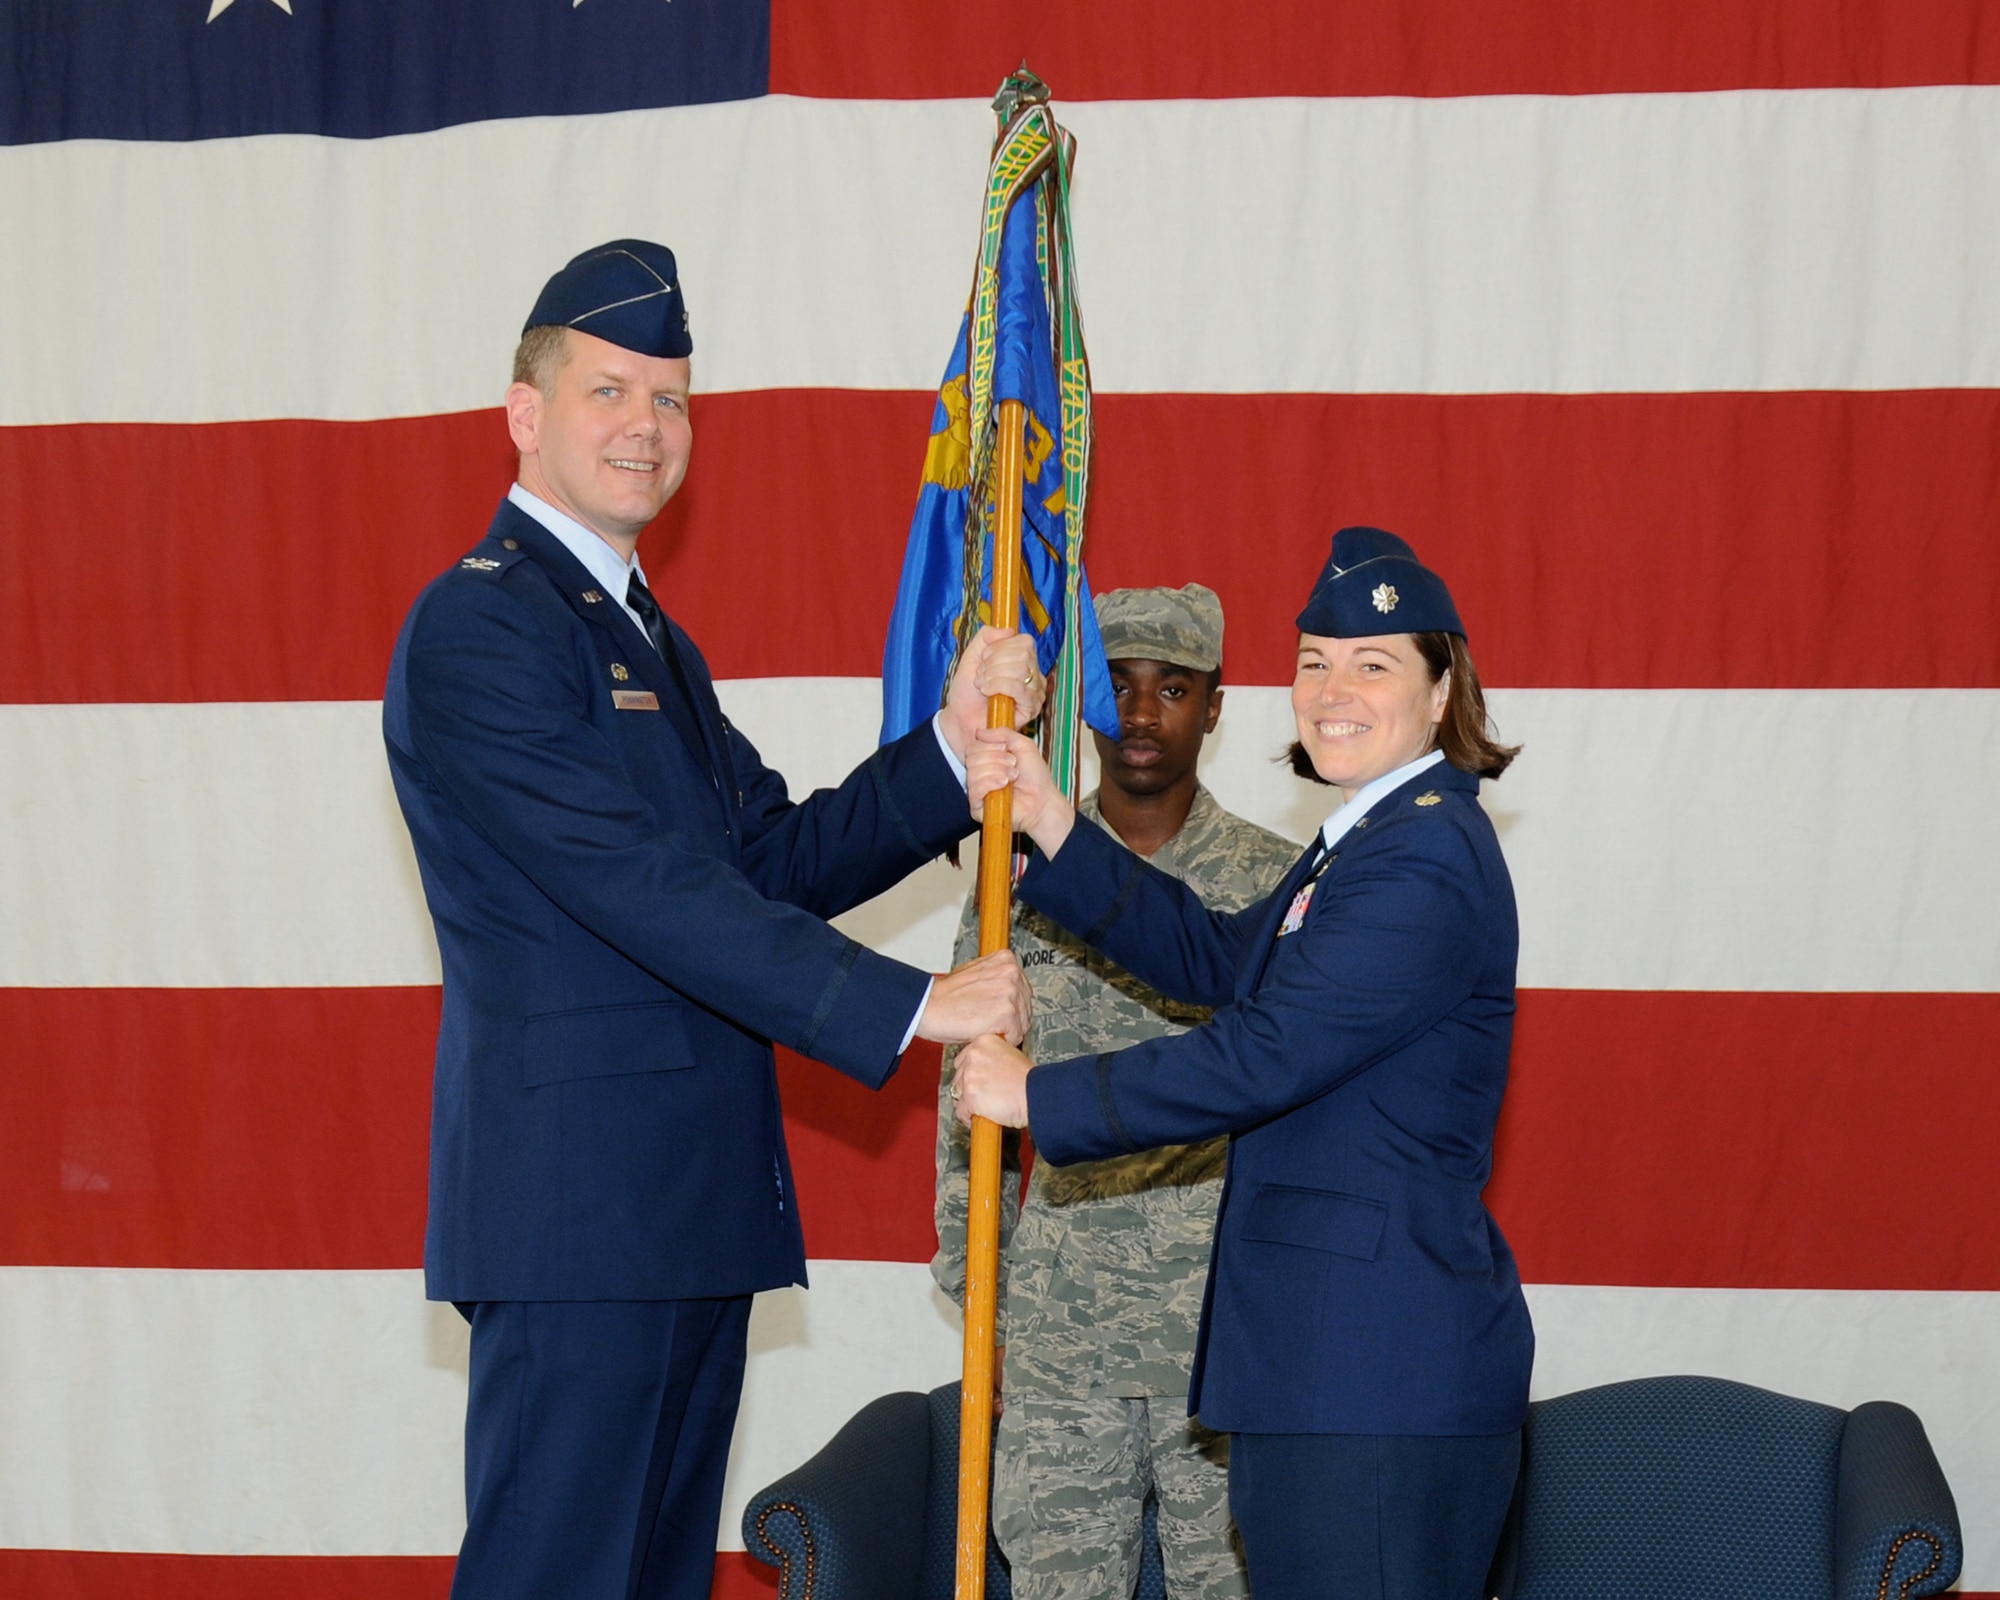 Col. Brett Pennington, 14th Operations Group Commander, hands the guidon to Lt. Col. Cheryl Ingber, the new 37th Flying Training Squadron Commander, at a change of command ceremony July 12 at the Fuels Maintenance Hangar. Ingber, who was previously in charge of Safety for the Wing Staff Agency, is taking command of the 37th FTS from Lt. Col. James Sparrow. (U.S. Air Force Photo/ Sharon Ybarra)